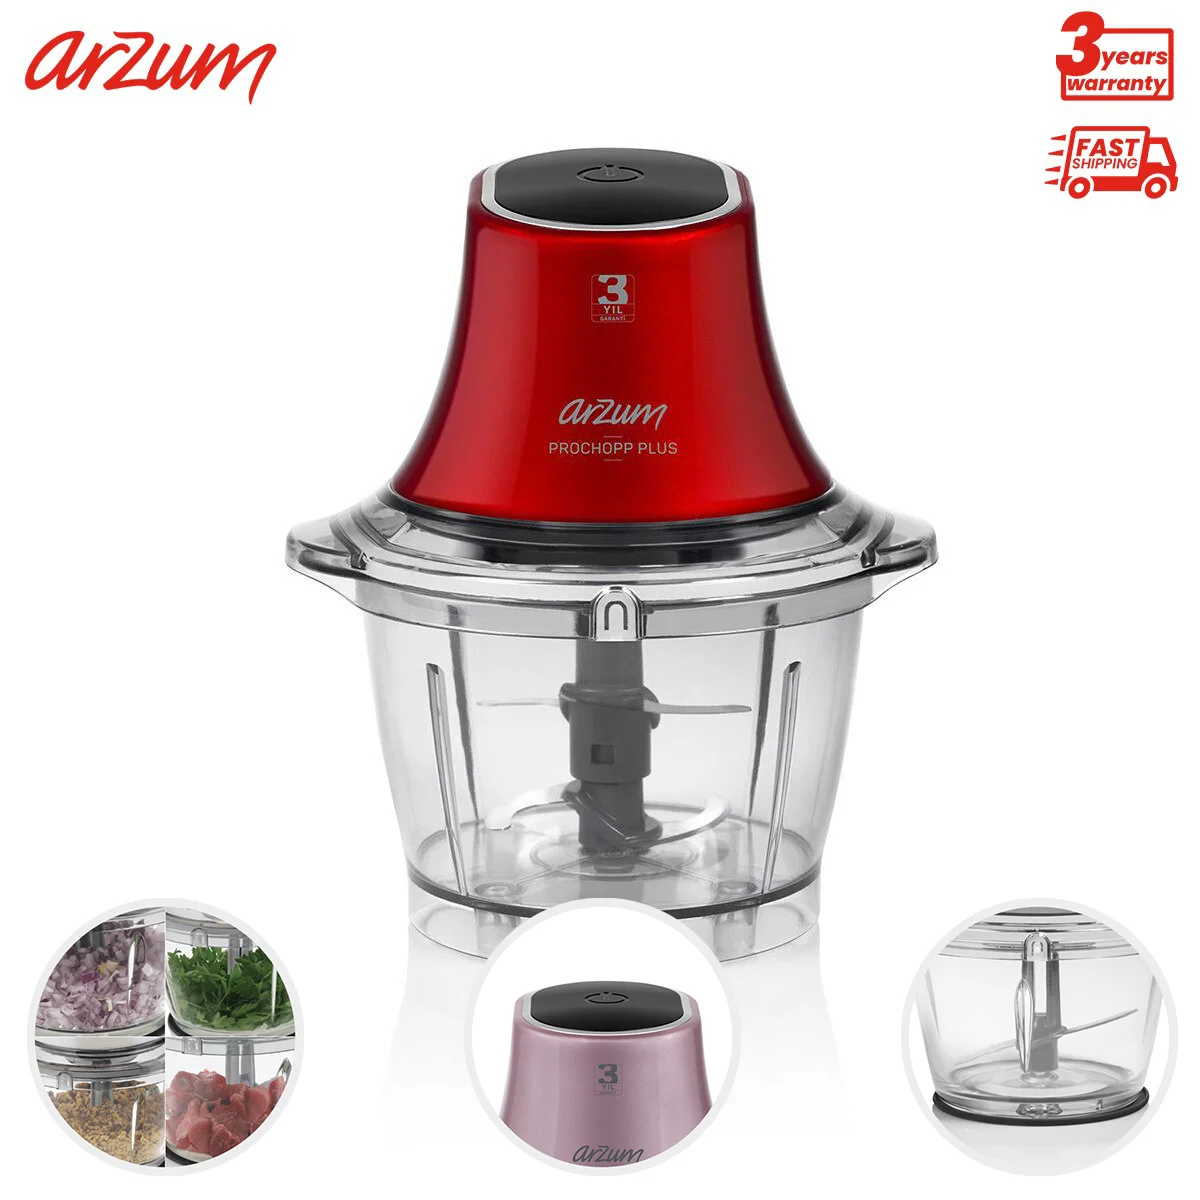 Arzum Prochopp Plus Chopper Electric Kitchen Appliances Automatic Chopping 1L Capacity with Stainless Steel Blades